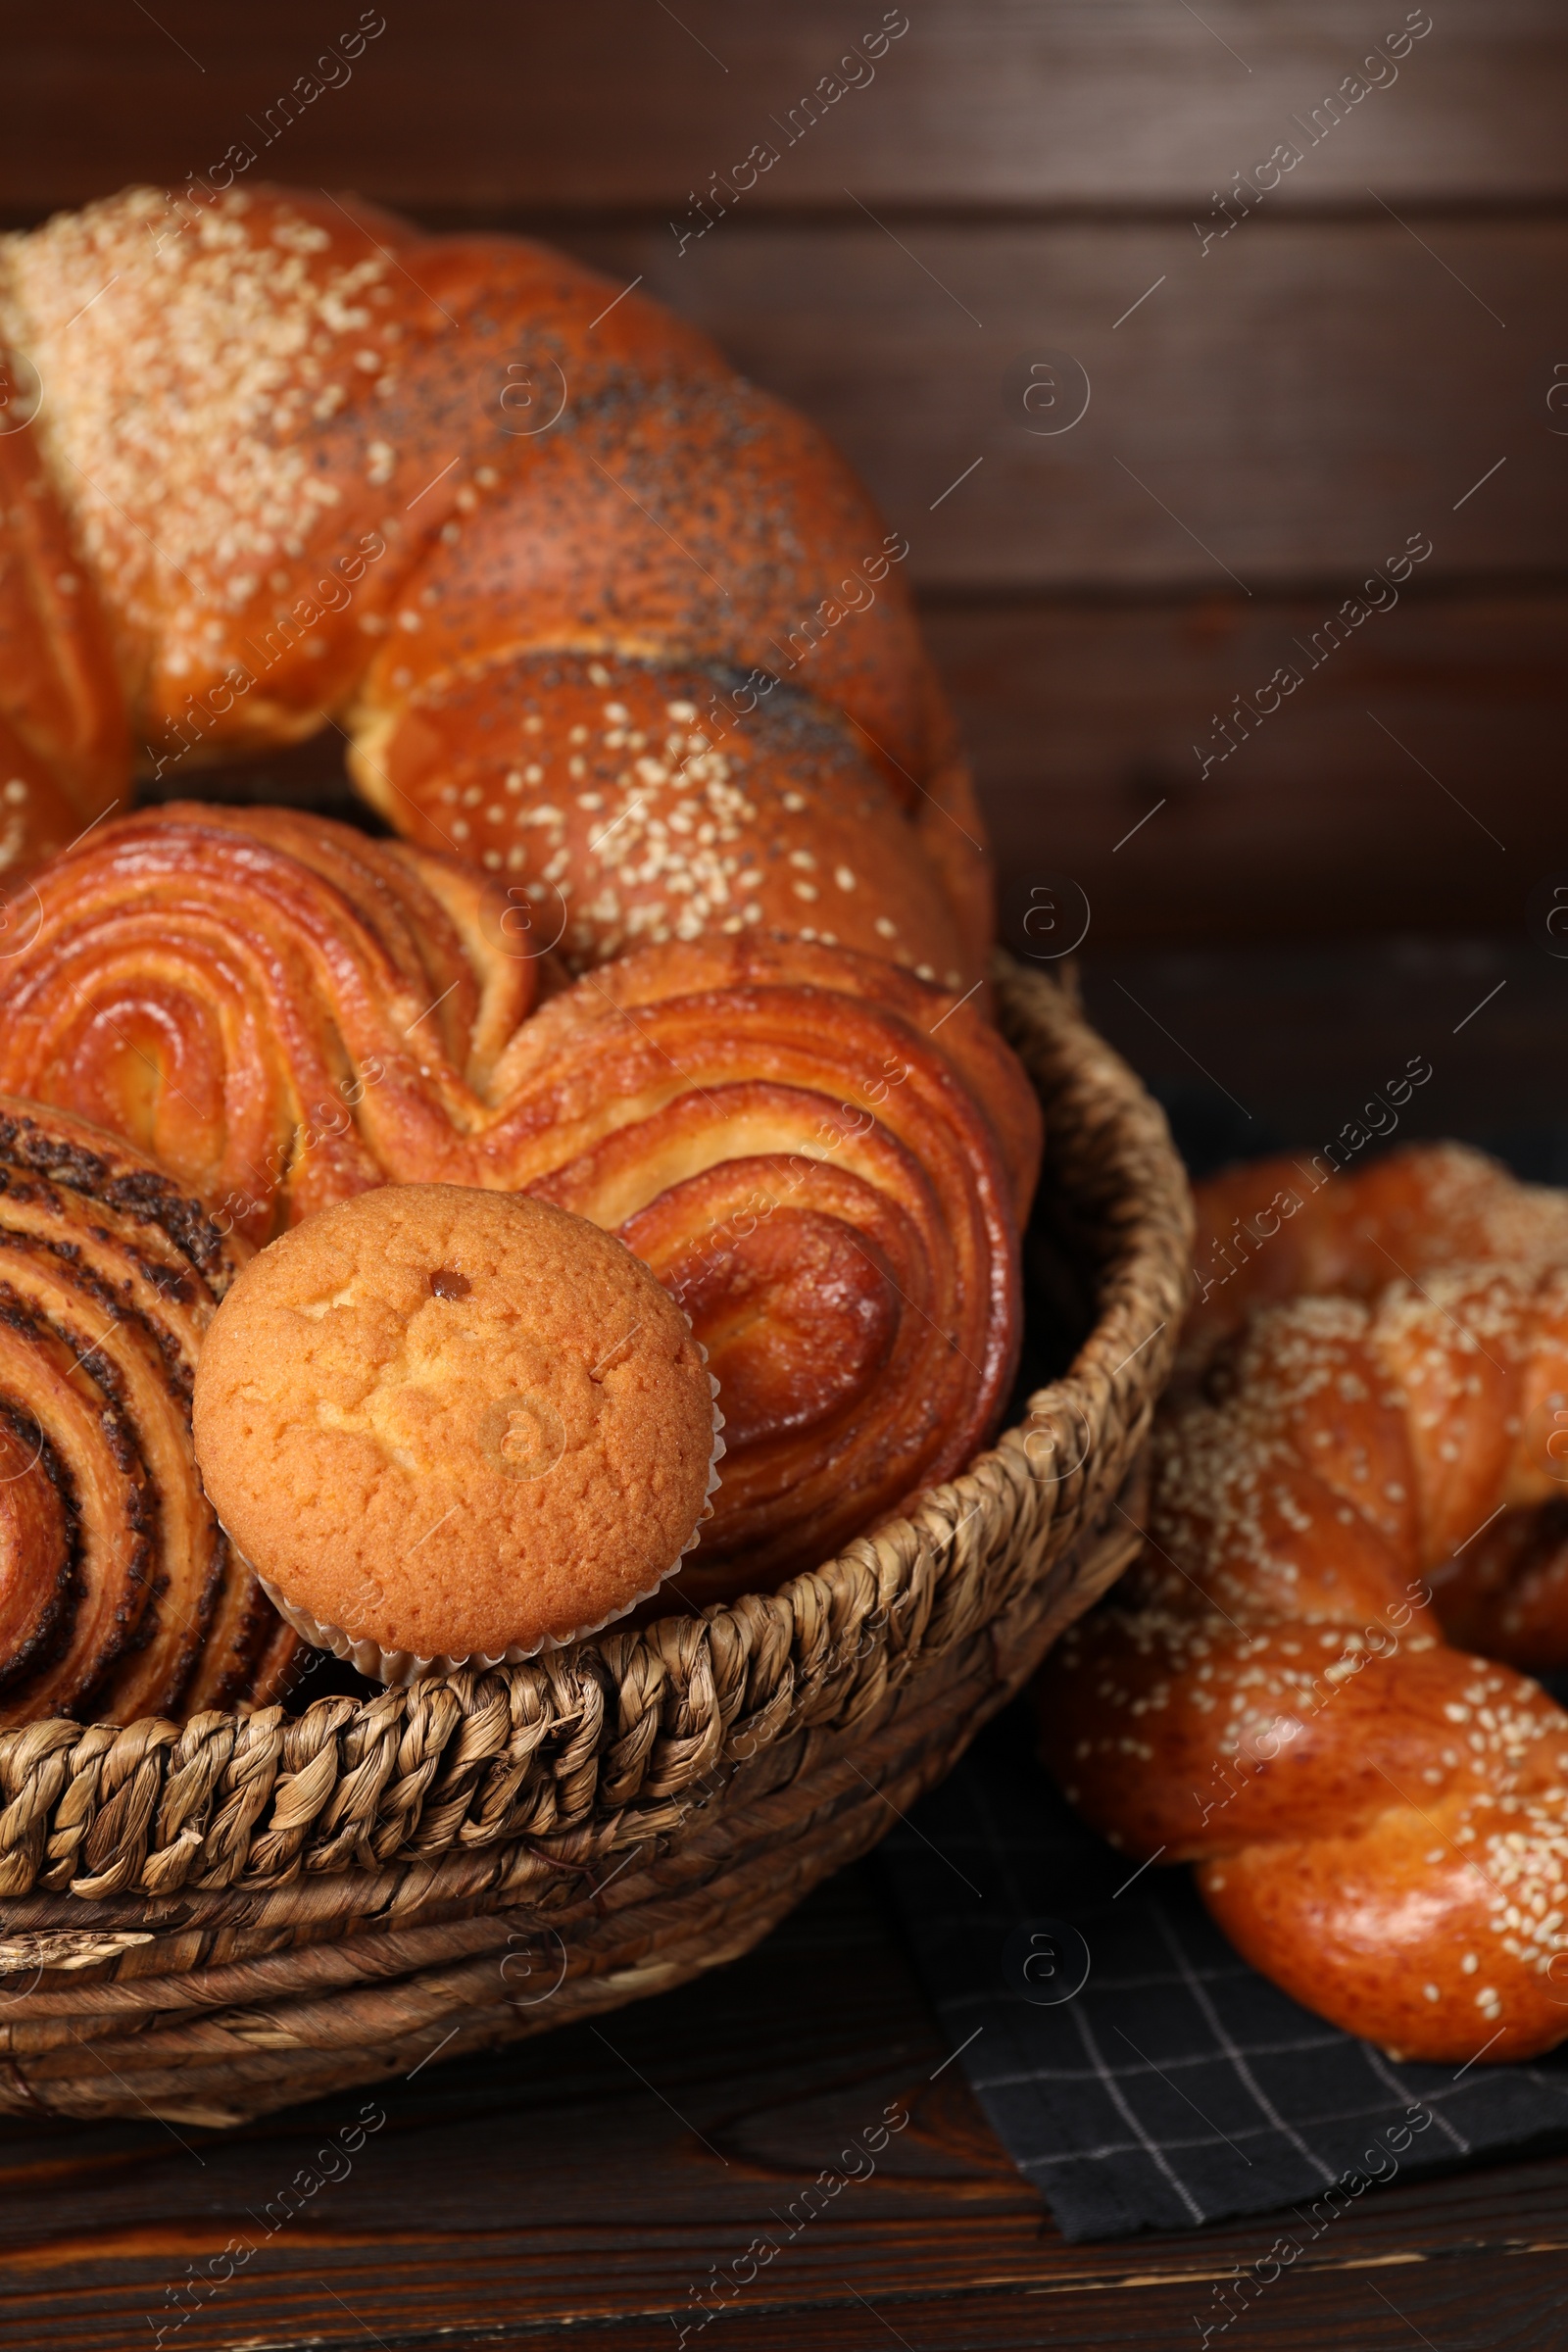 Photo of Wicker basket with different tasty freshly baked pastries on wooden table